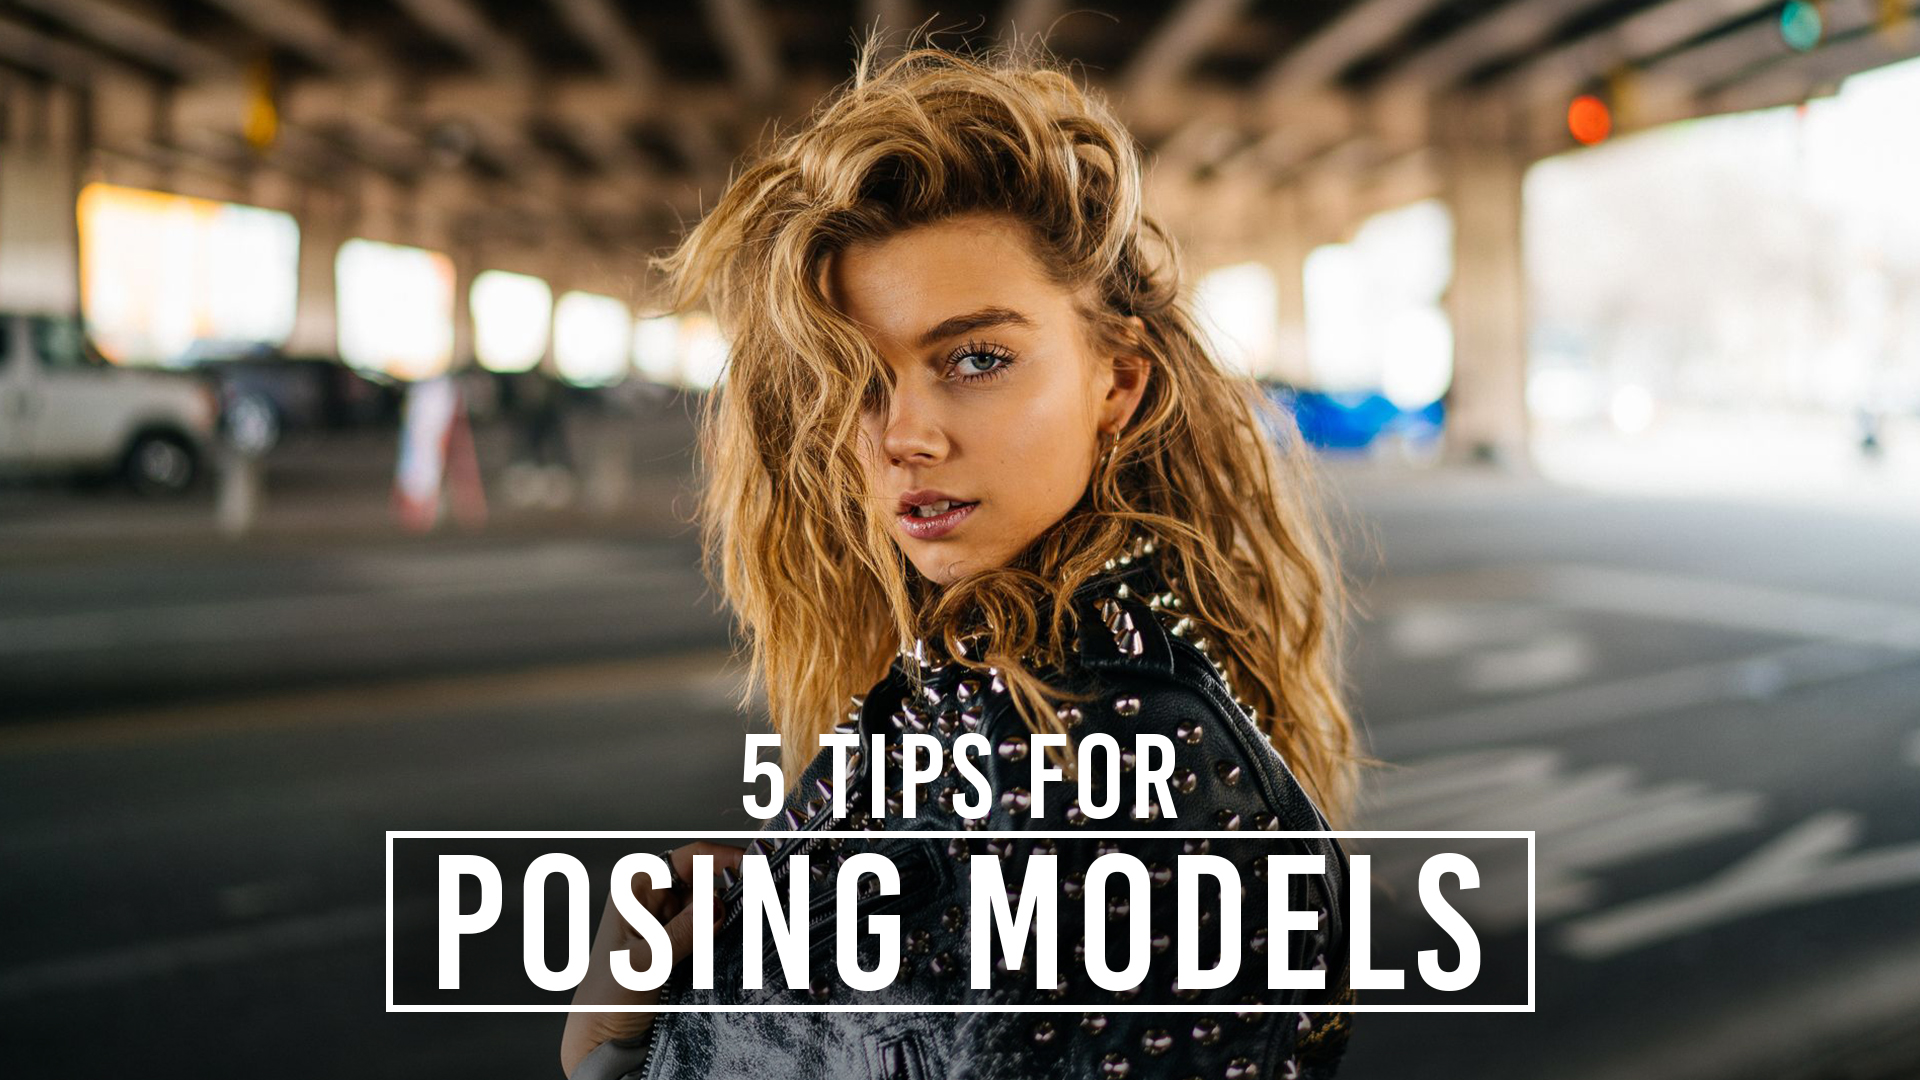 Natural Female Poses: Pro Tips & Ideas for Portraits of Women